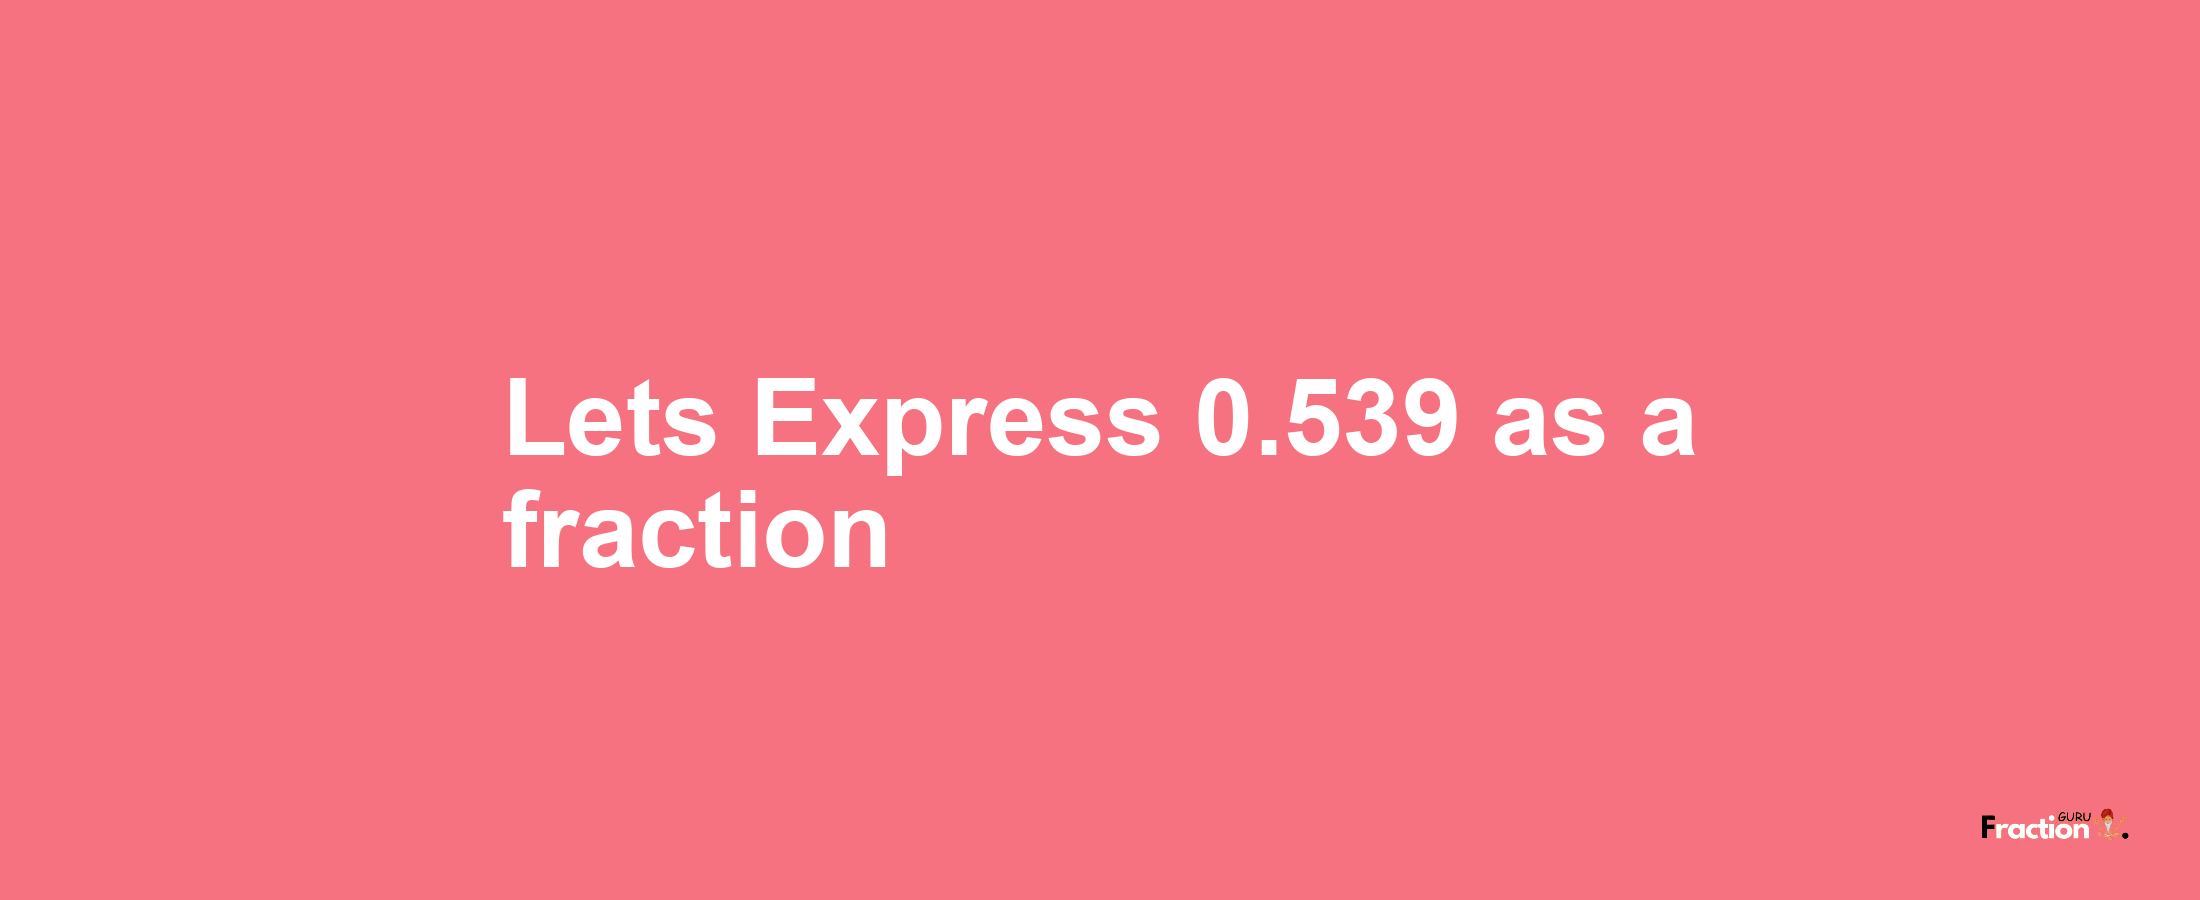 Lets Express 0.539 as afraction